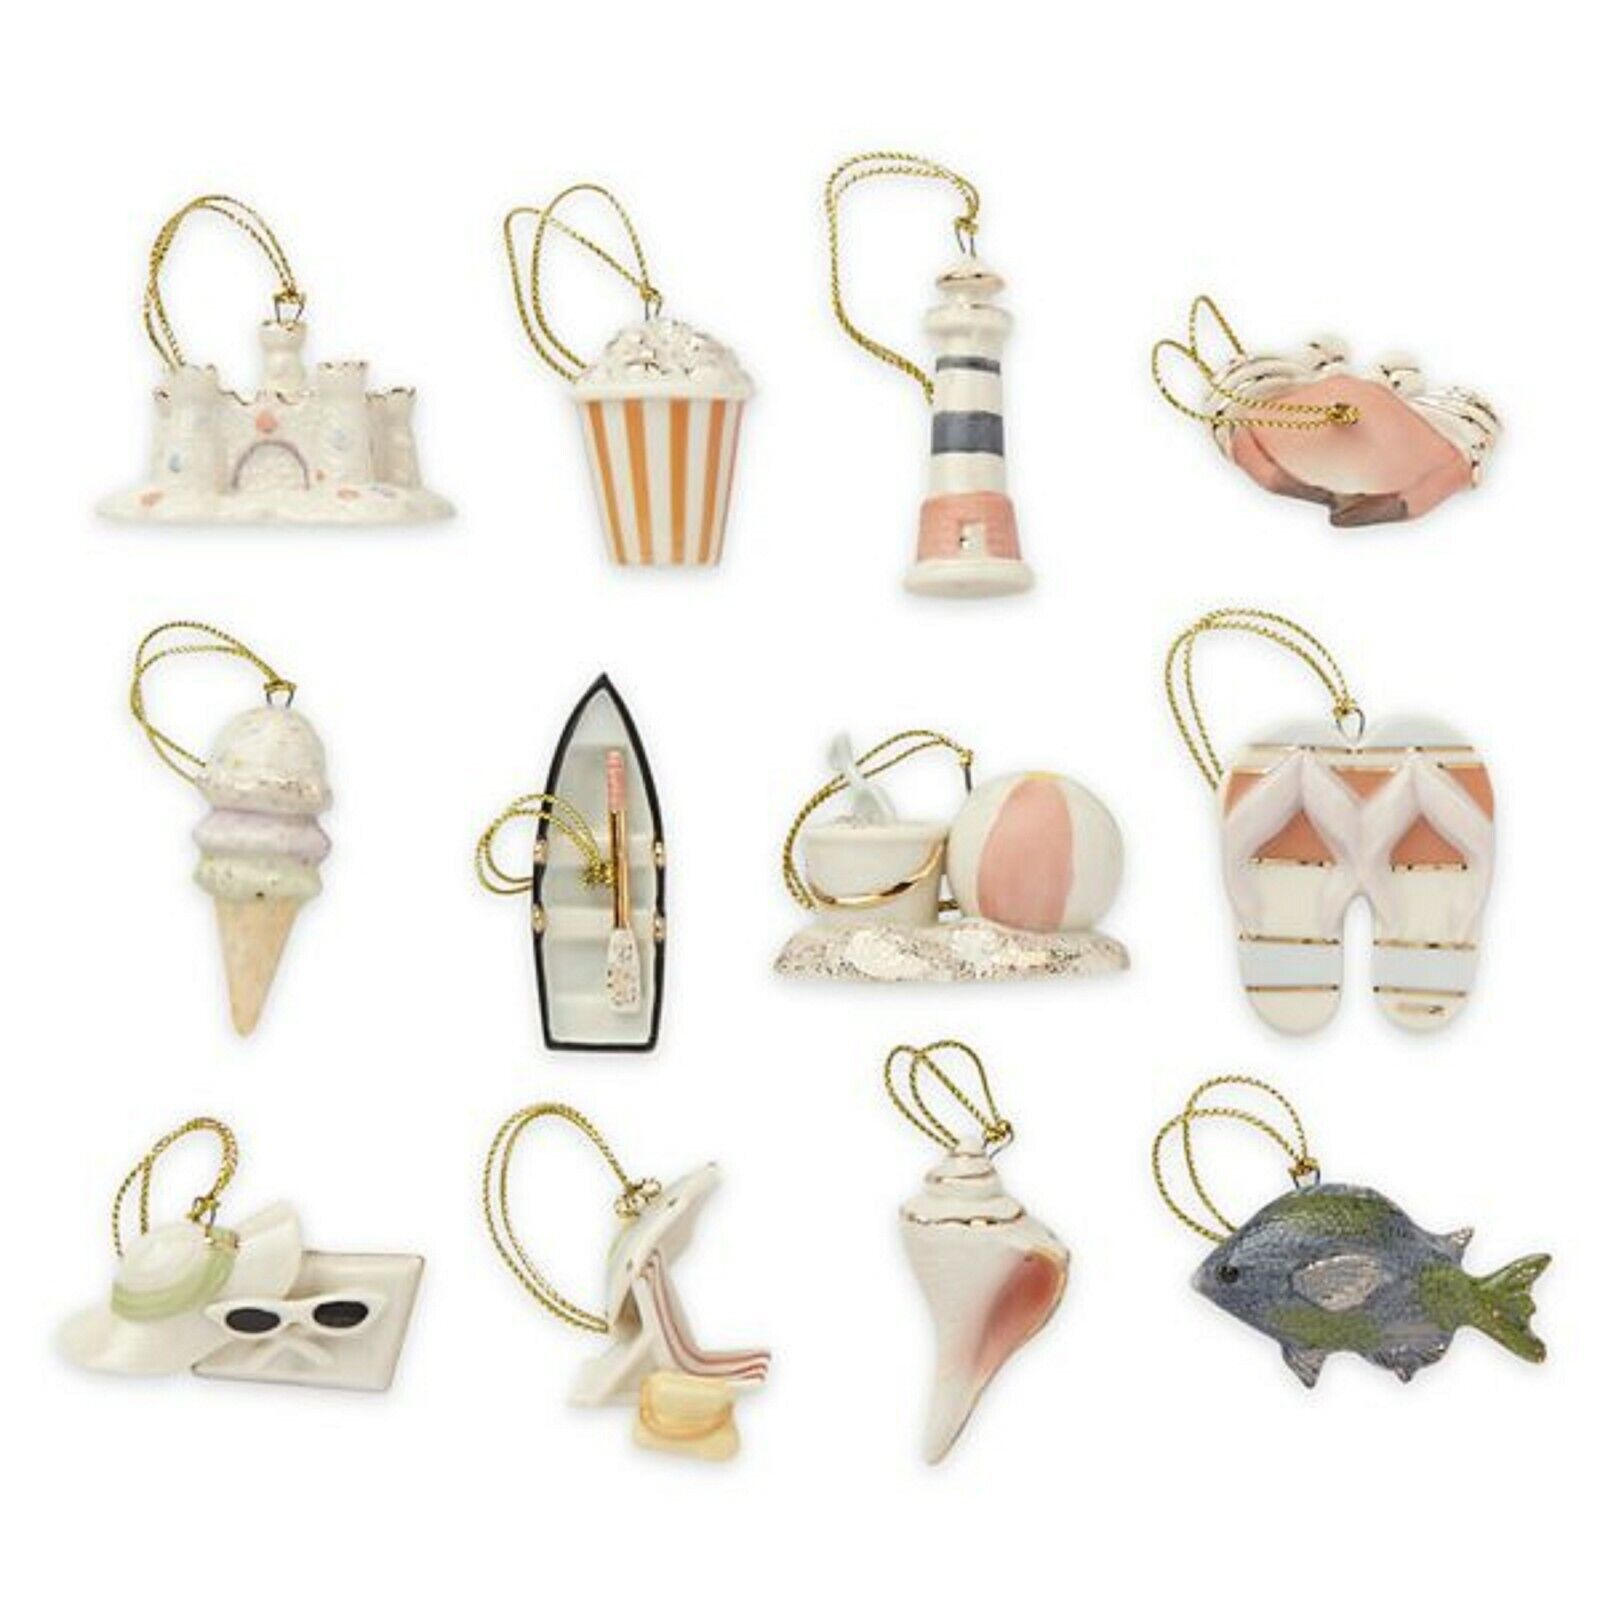 Primary image for Lenox Summer Miniature Tree Ornaments Set of 12 Sand Castle Boat Beach Ball NEW